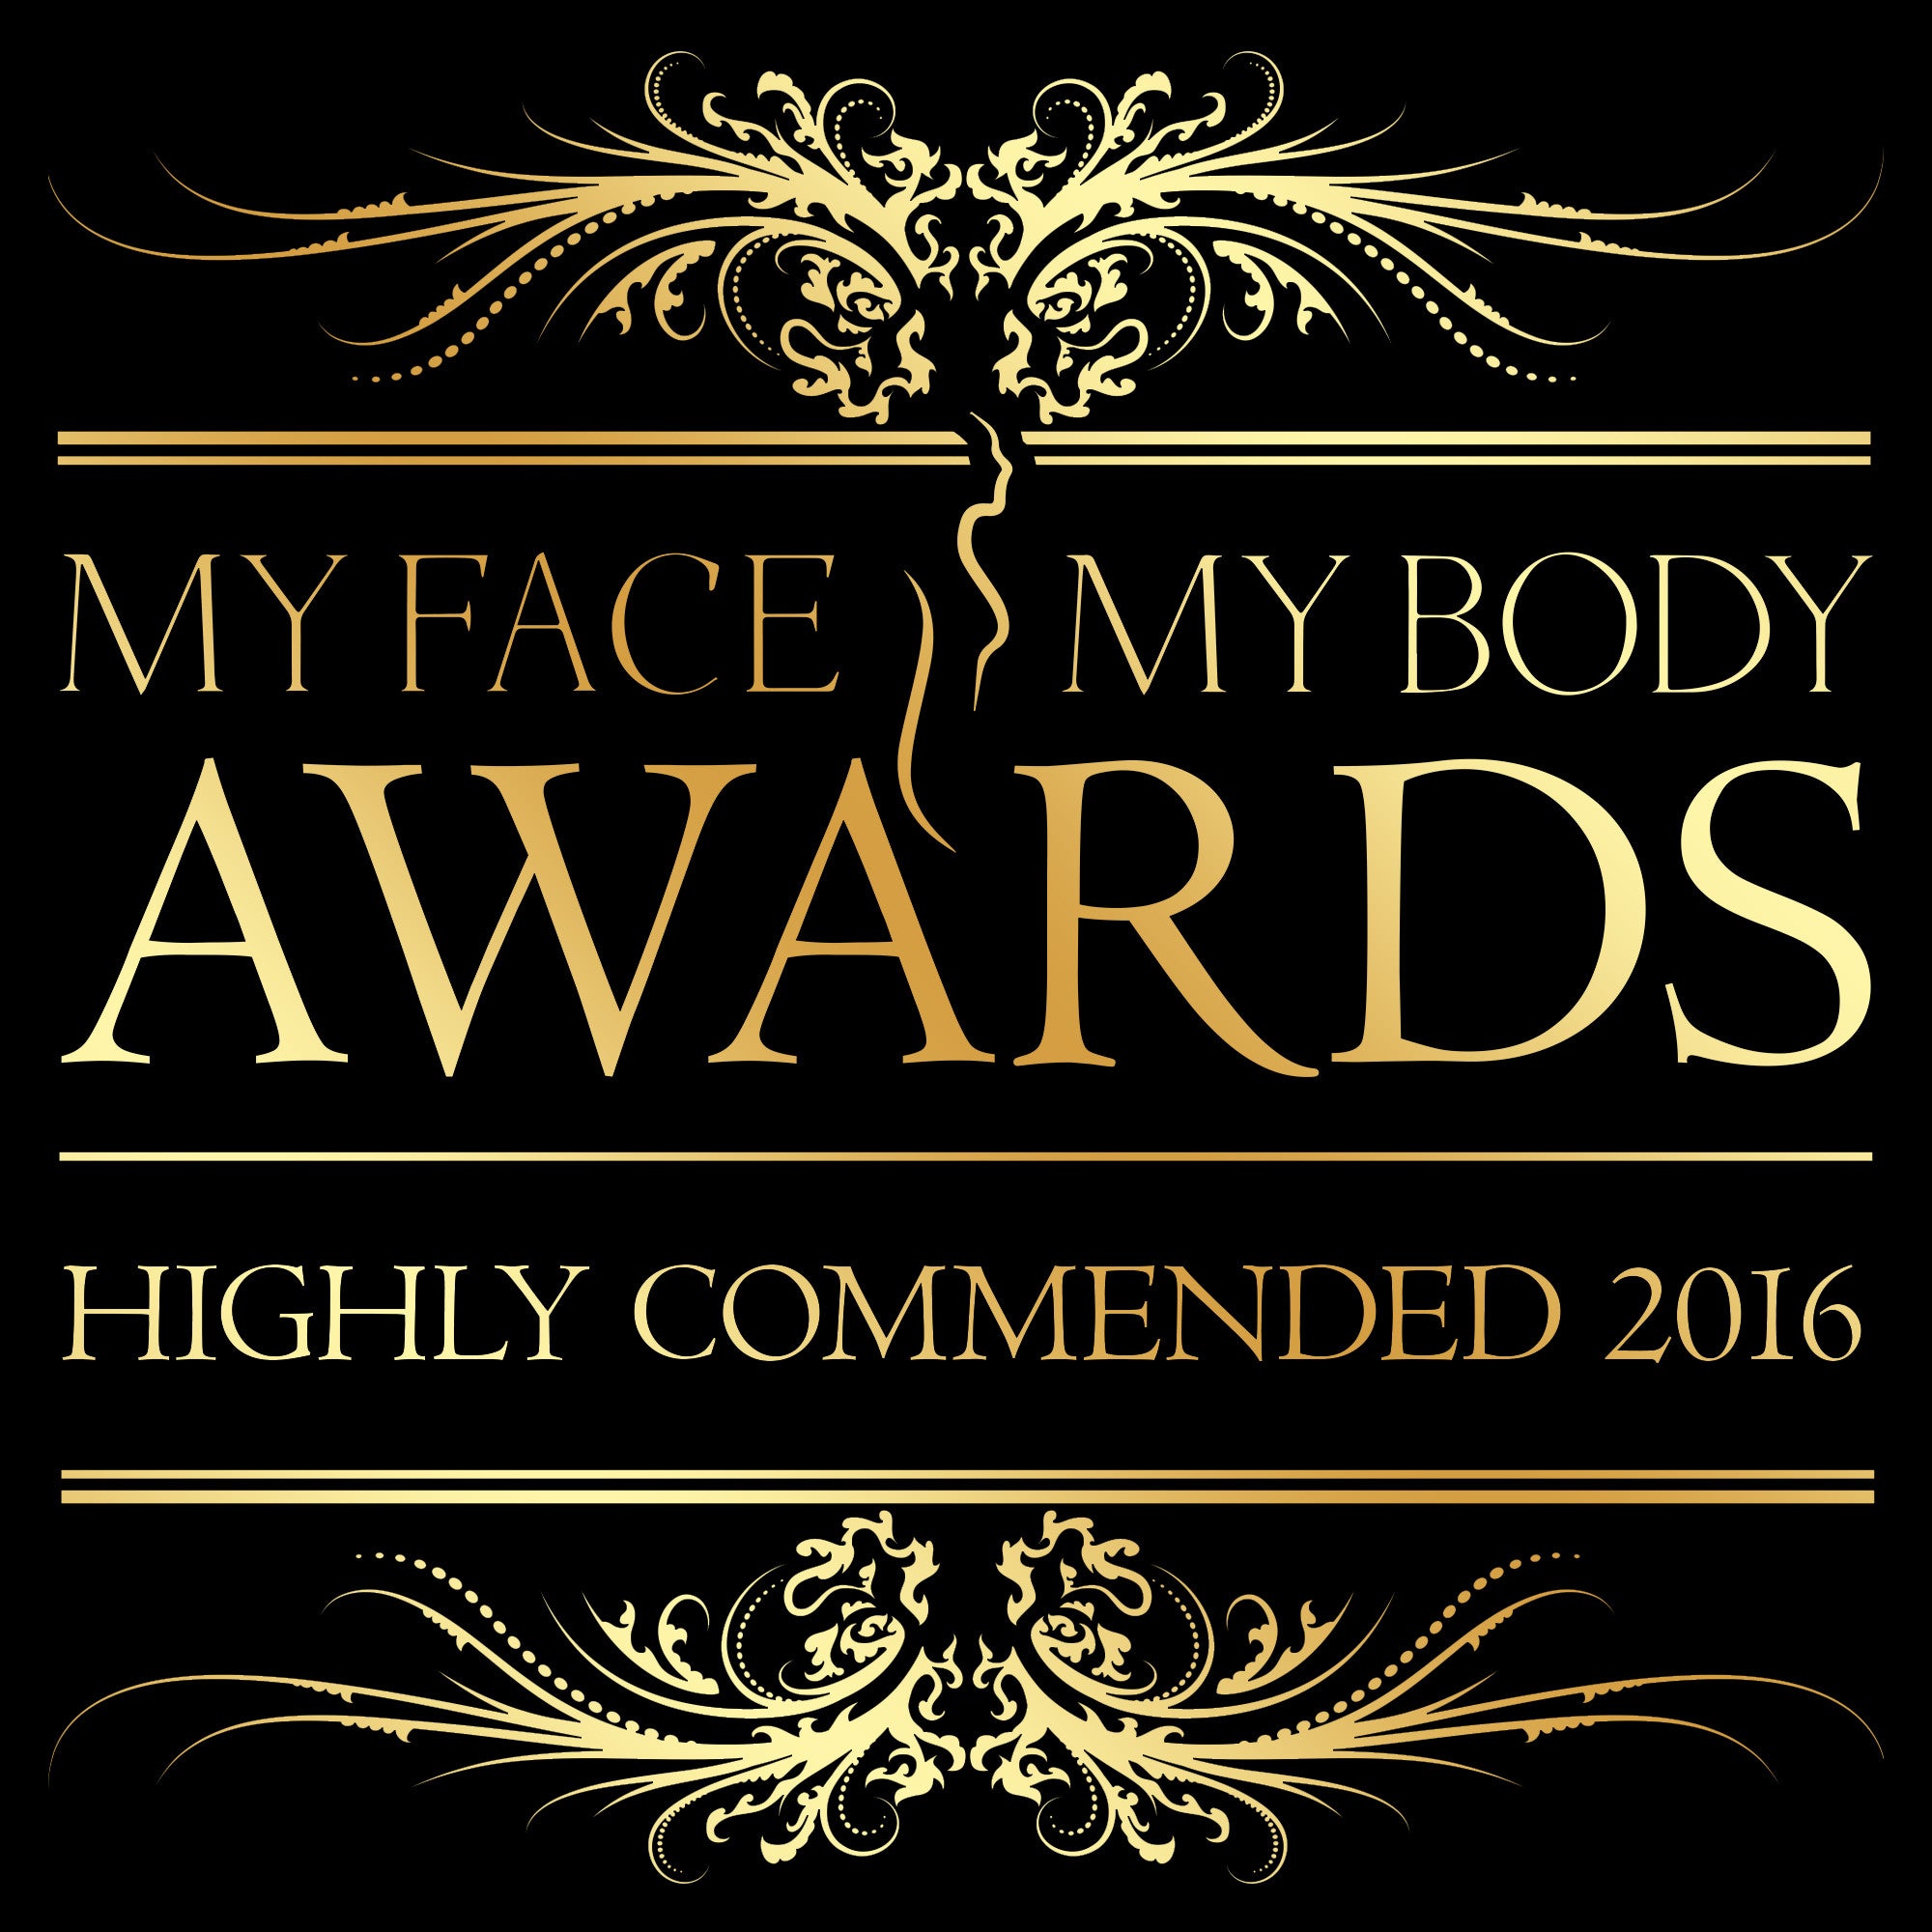 We received a highly commended award at the MyFaceMyBody Awards!